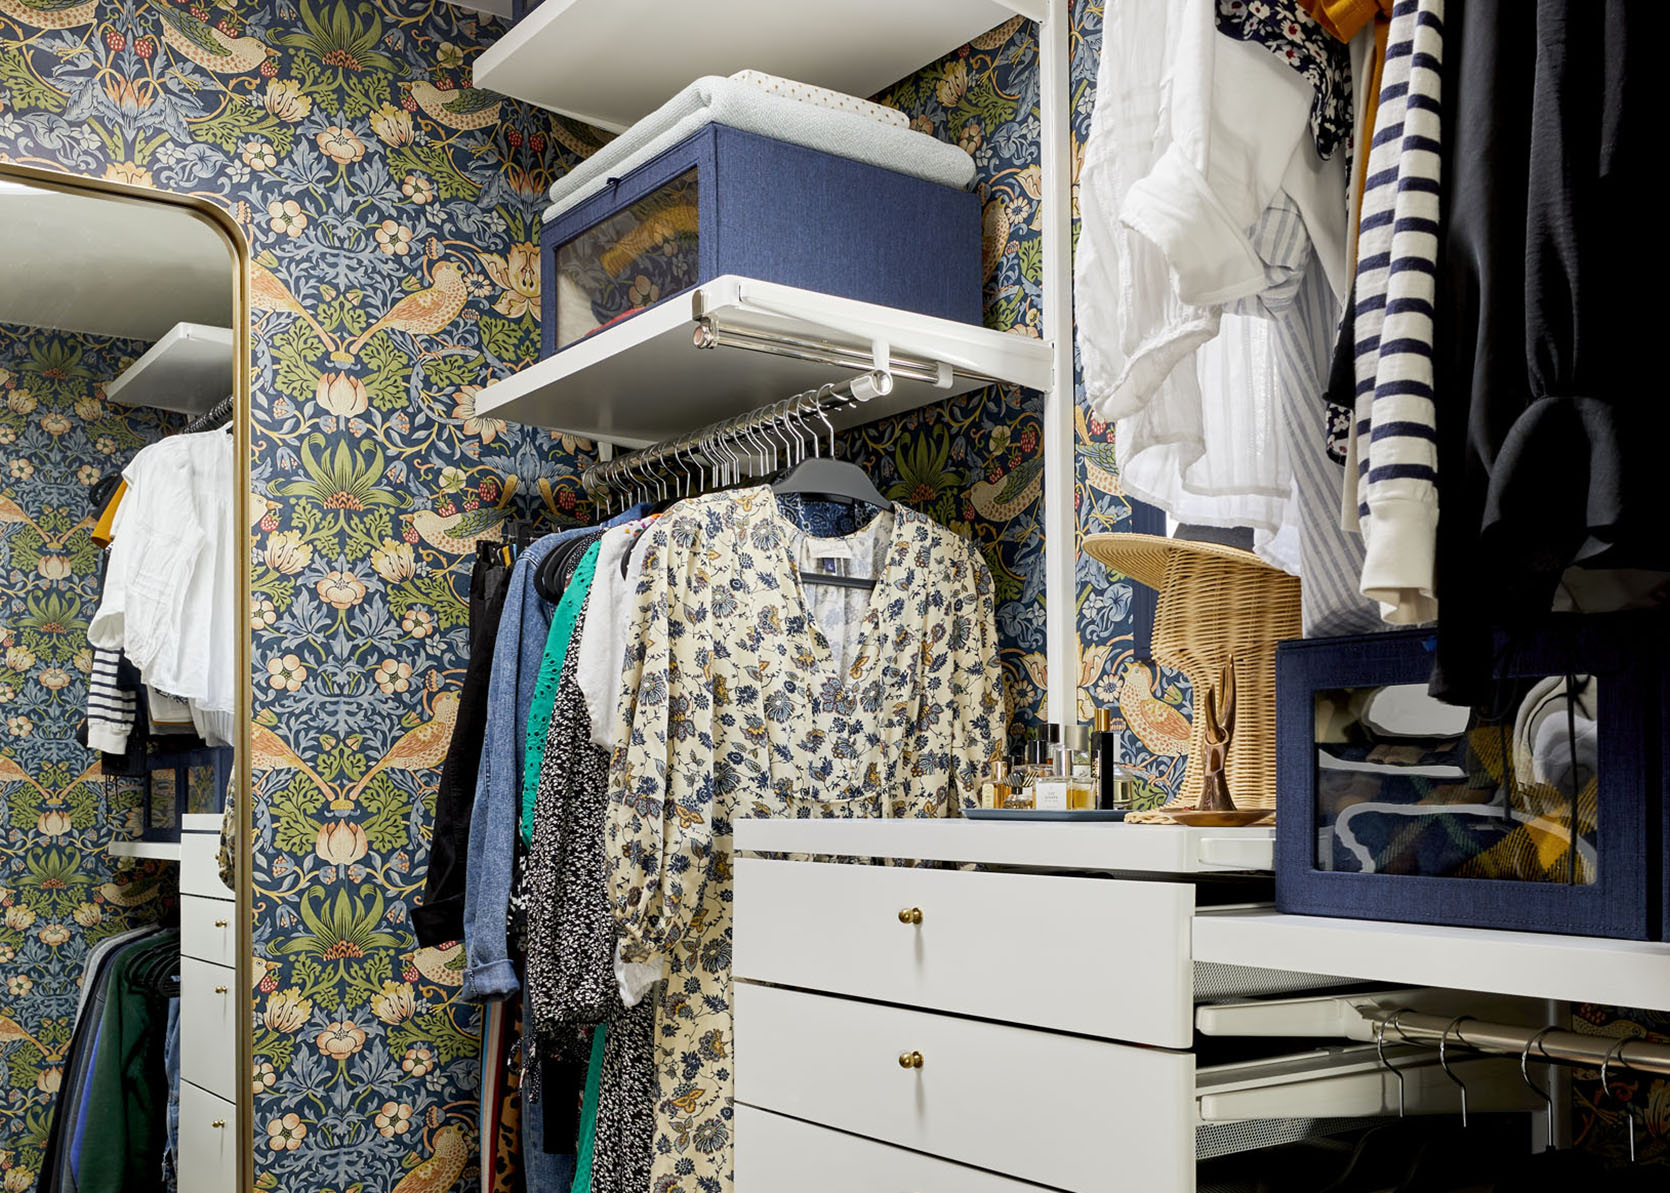 Sara's Primary Closet Reveal - The Bold Design Moment She's Been Craving